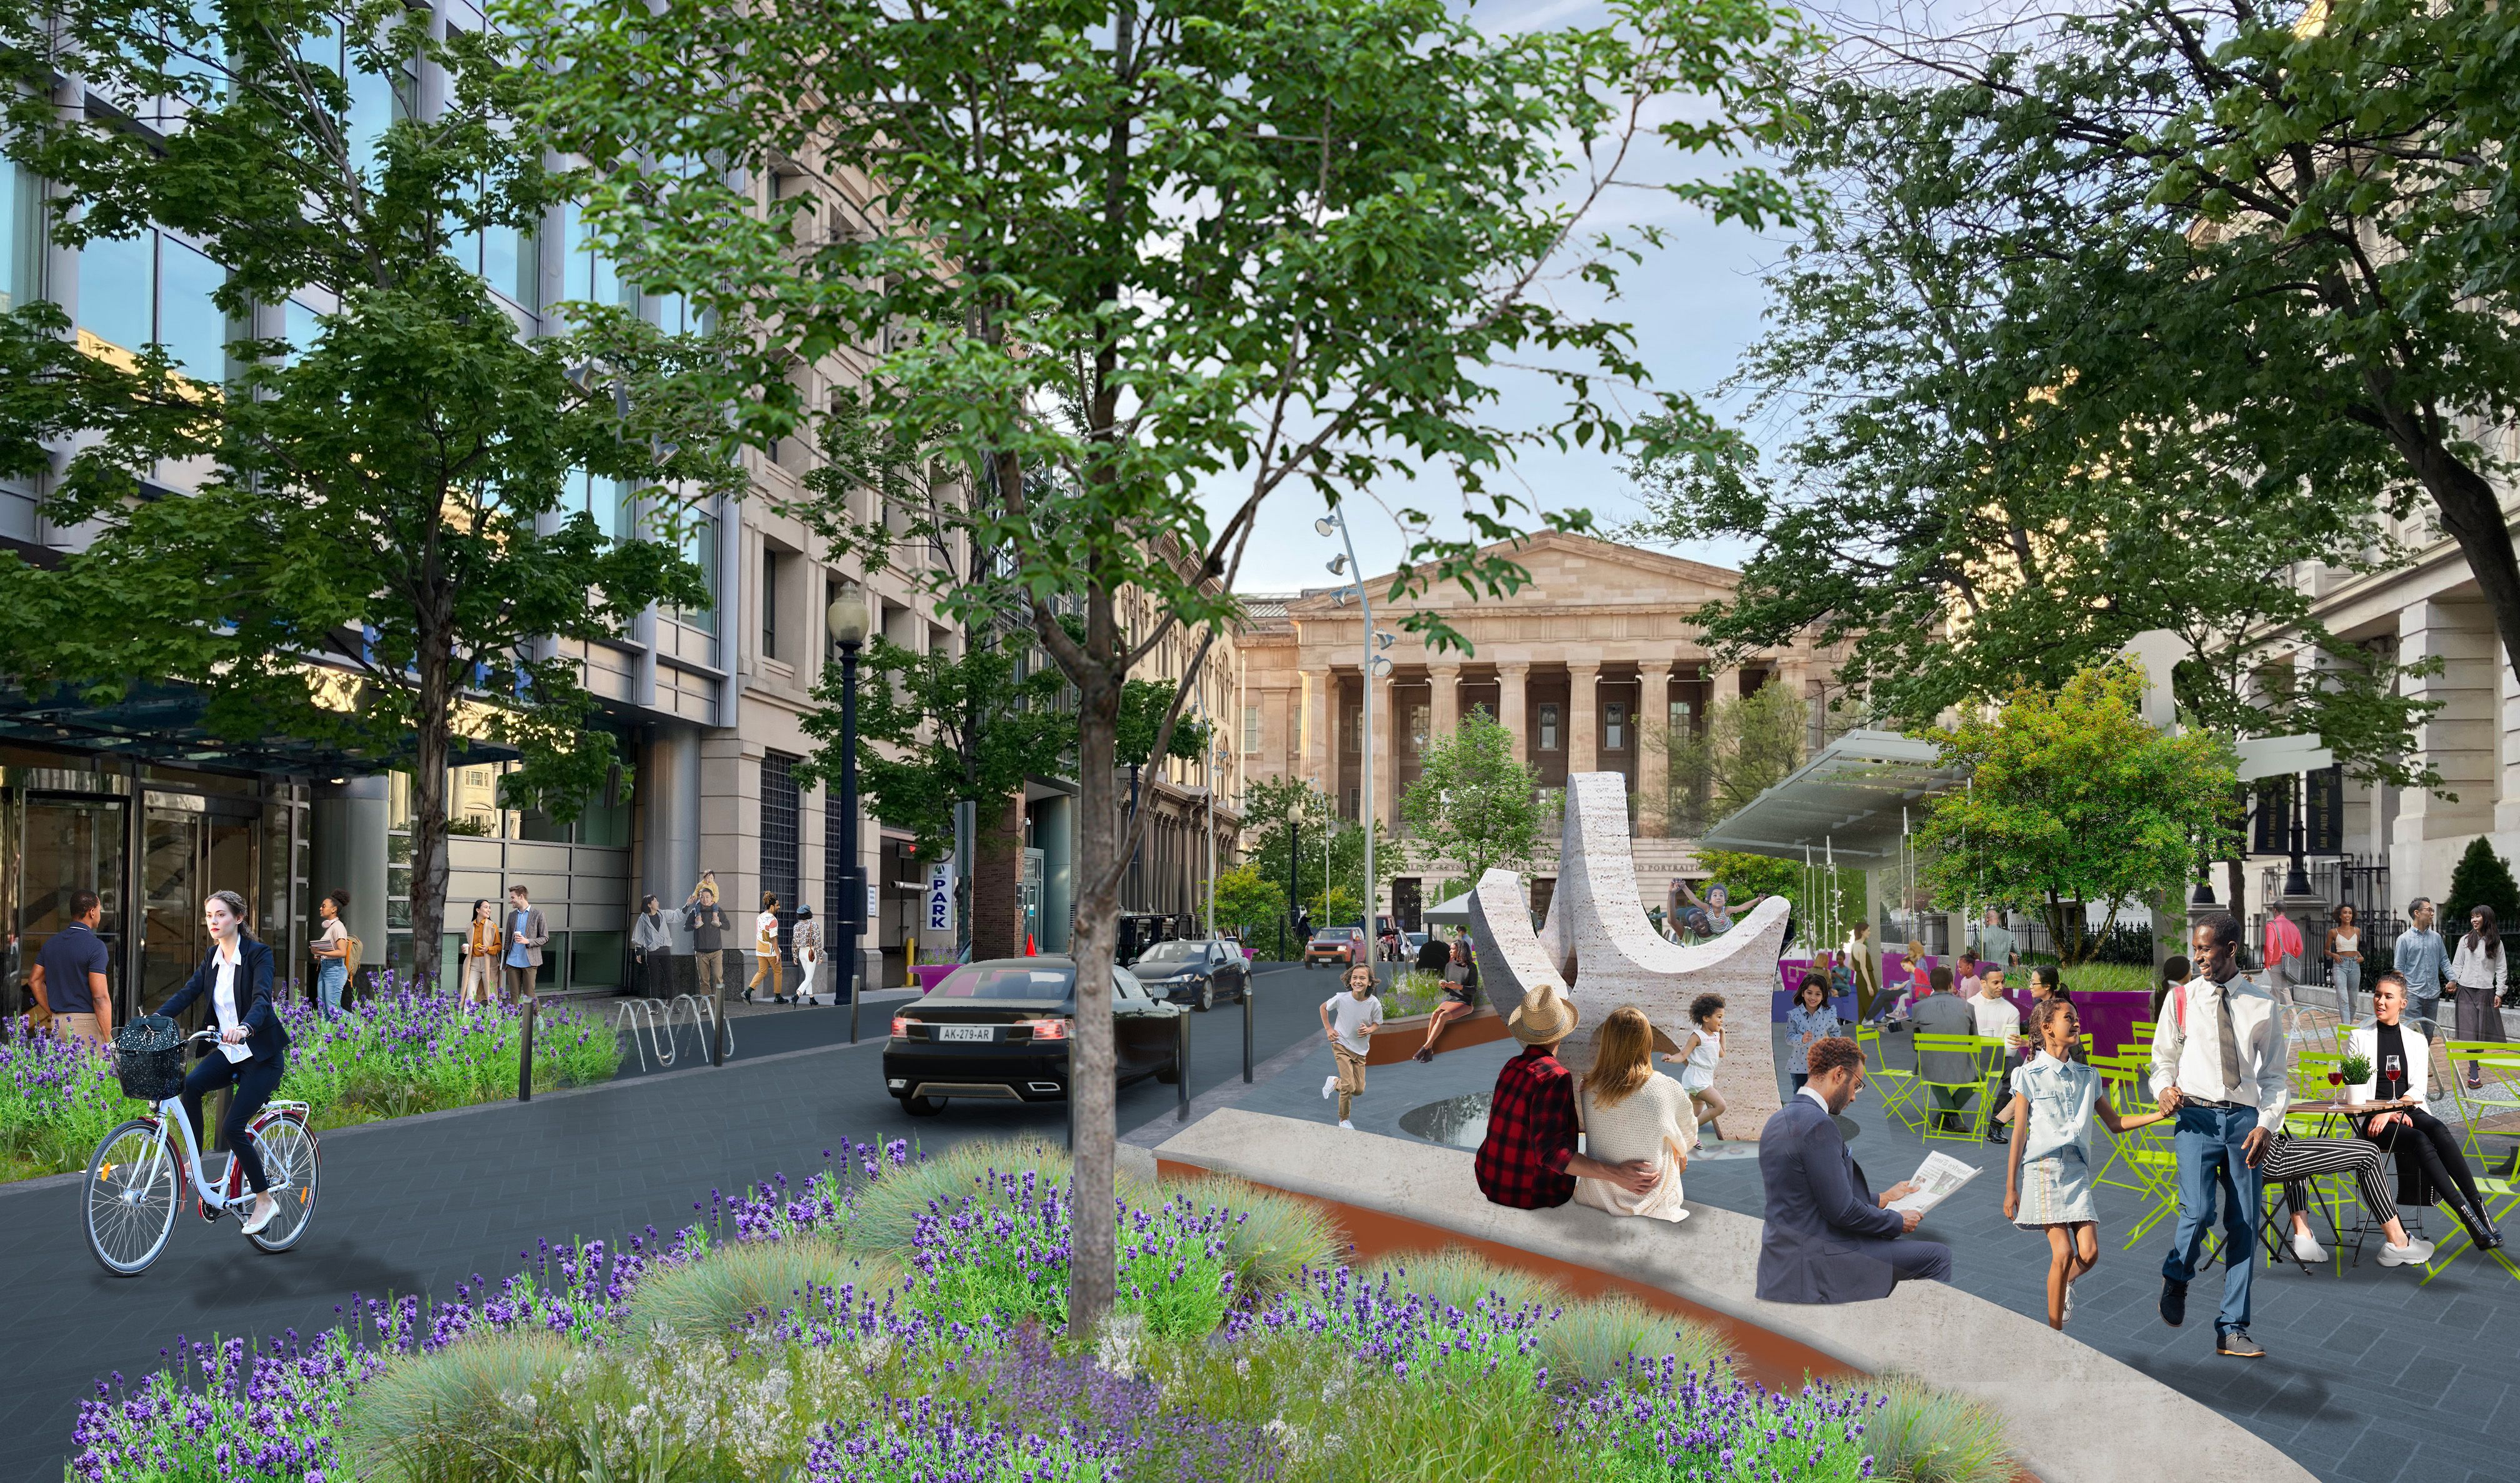 An 8th Street rendering shows an expanded sidewalk plaza area with people sitting and walking through a park